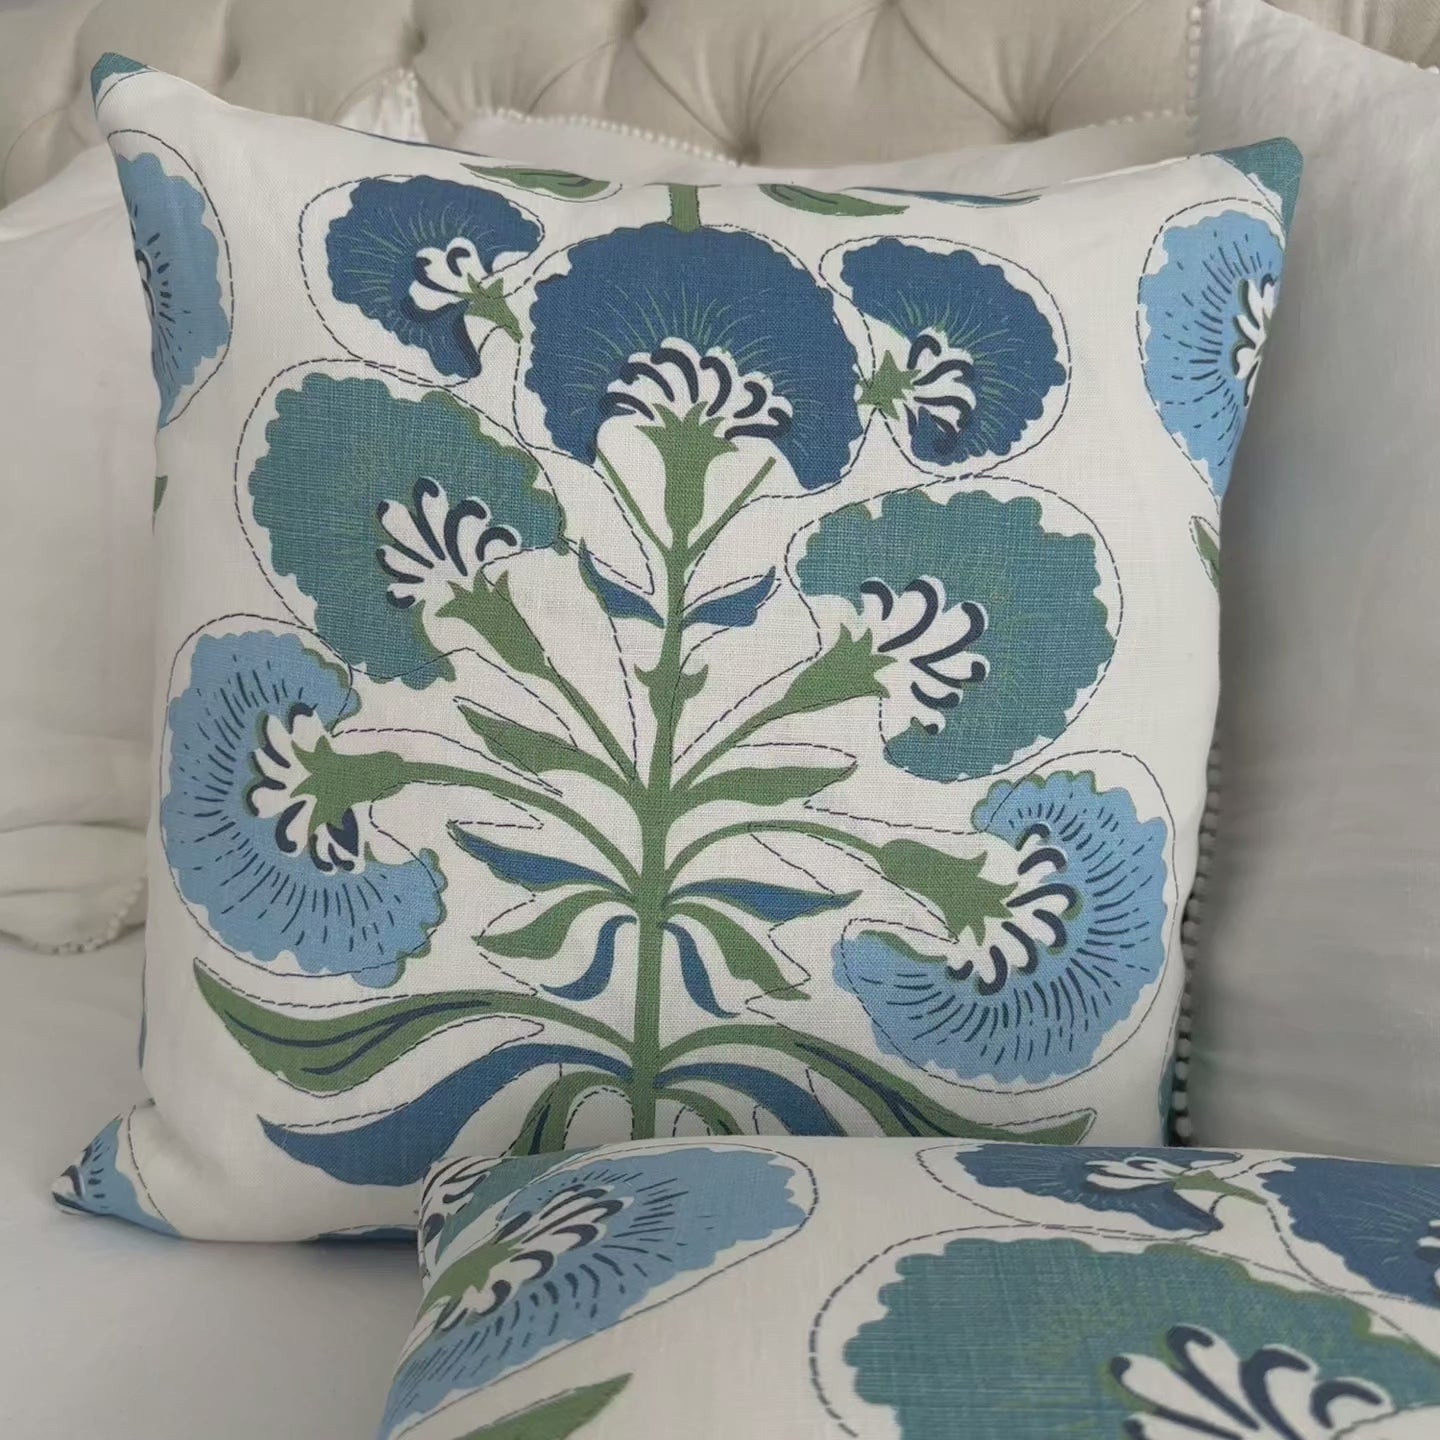 Thibaut Tybee Tree Blue and Green Floral Block Print Designer Linen Decorative Throw Pillow Cover Product Video